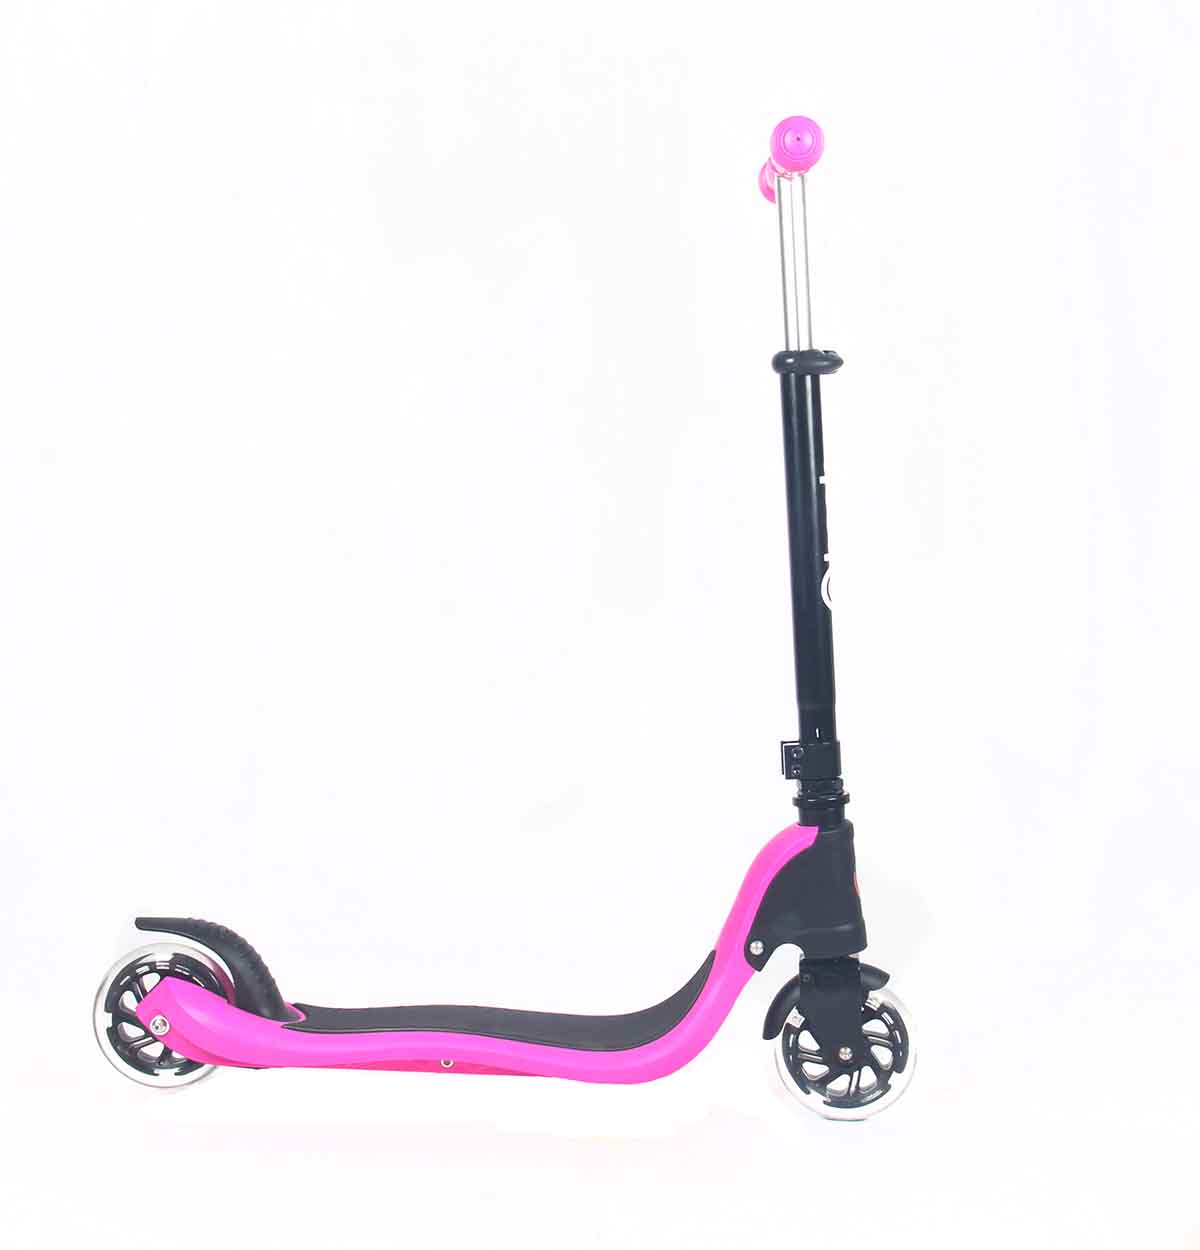 Scooter FW Pink Hook